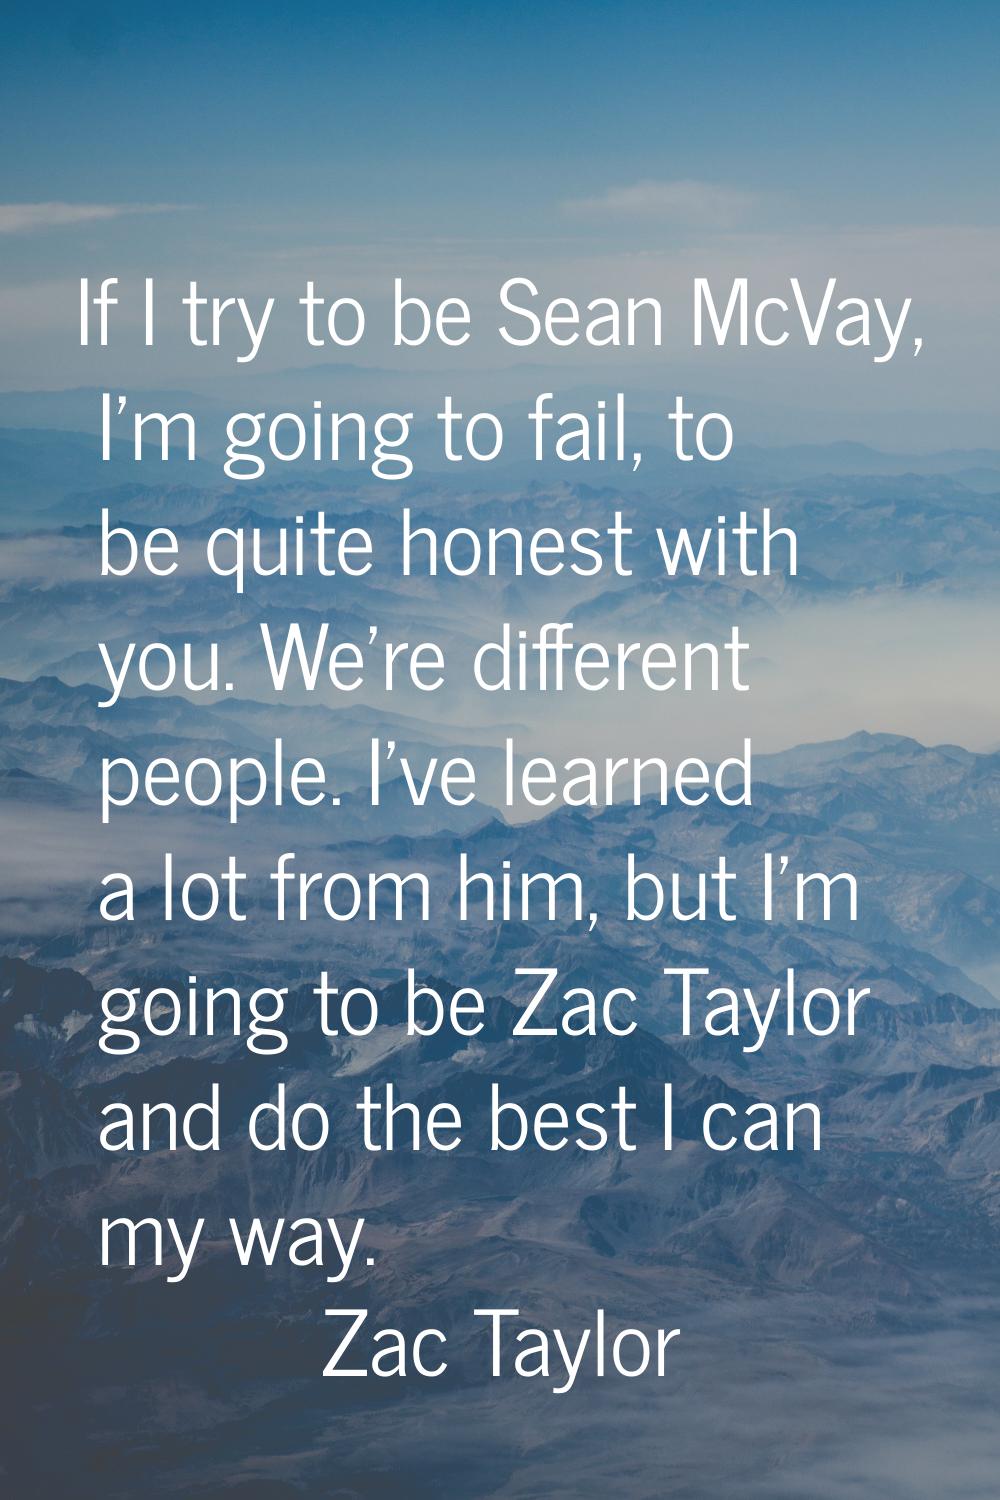 If I try to be Sean McVay, I'm going to fail, to be quite honest with you. We're different people. 